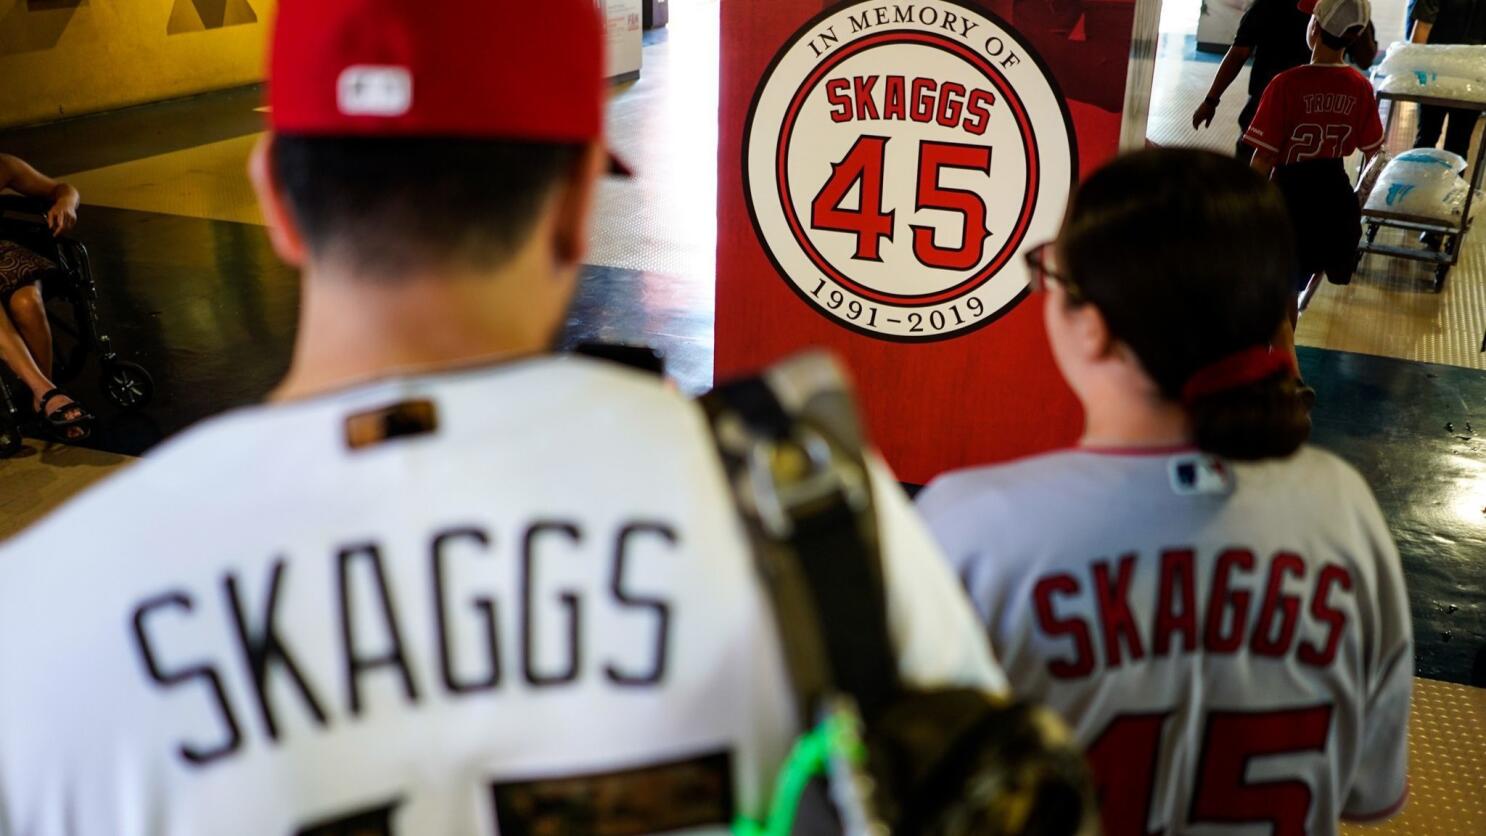 Angels point to Tyler Skaggs' spirit and numerical oddities after no-hitter  - Los Angeles Times